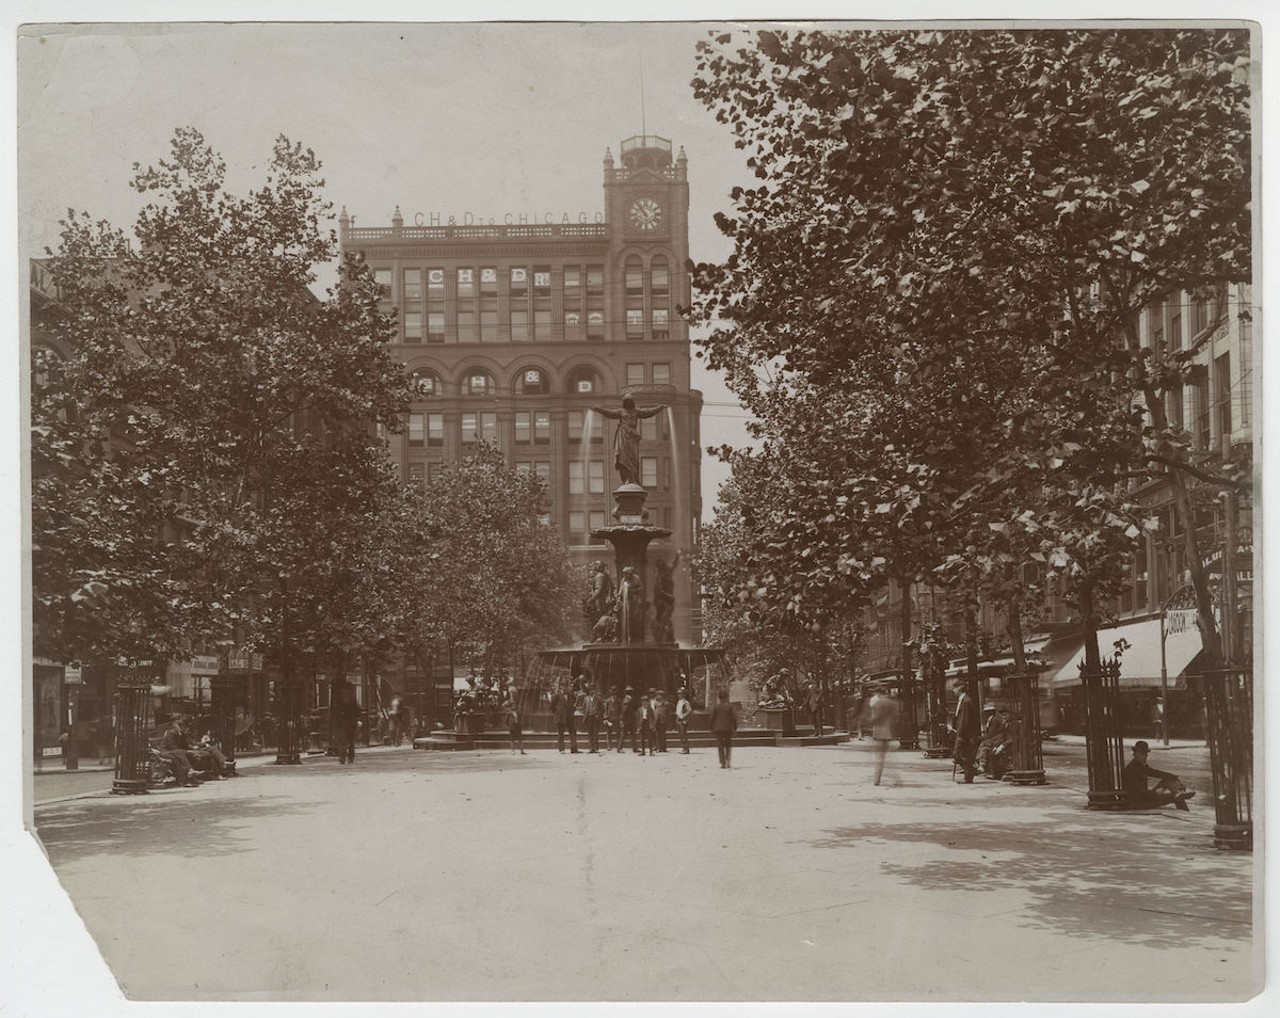 Fountain Square in downtown Cincinnati, 1910. Photo by Young & Carl 
Fountain Square's long been regarded as the heart of Cincinnati. It was gifted to the city by American hardware magnate Henry Probasco in memory of his business partner and brother-in-law, Tyler Davidson, whom the fountain is named for. The square once existed as an island down Fifth Street but was renovated in the '70s to widen the plaza and change the flow of traffic. It was renovated and redesigned again in the early 2000s to attract more visitors and serve as a hub for events downtown.